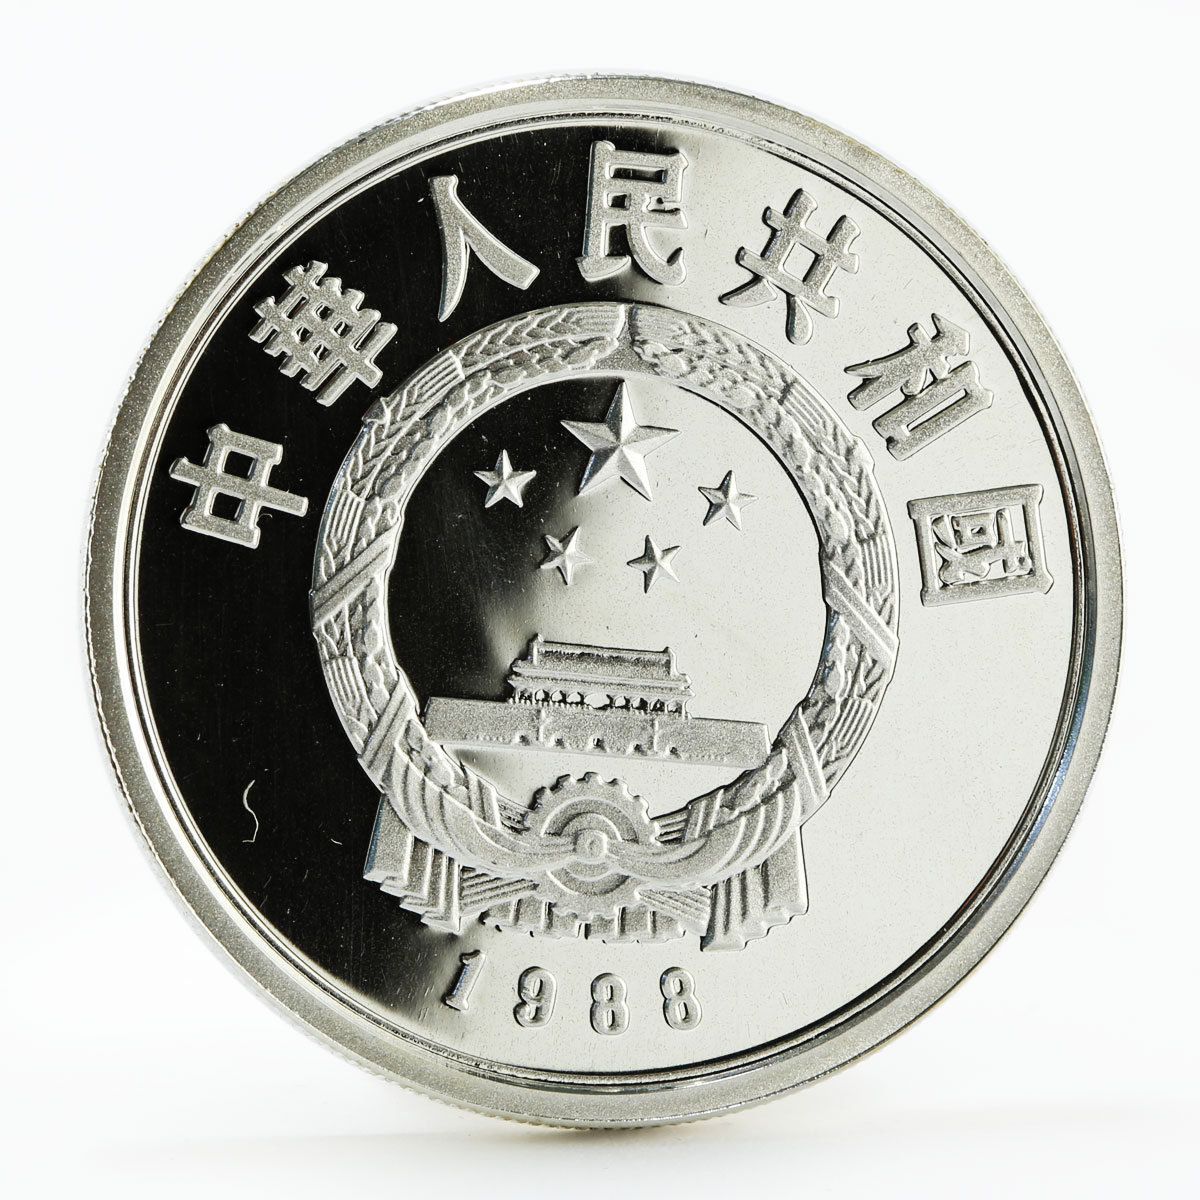 China 10 yuan Crested Ibis proof silver coin 1988